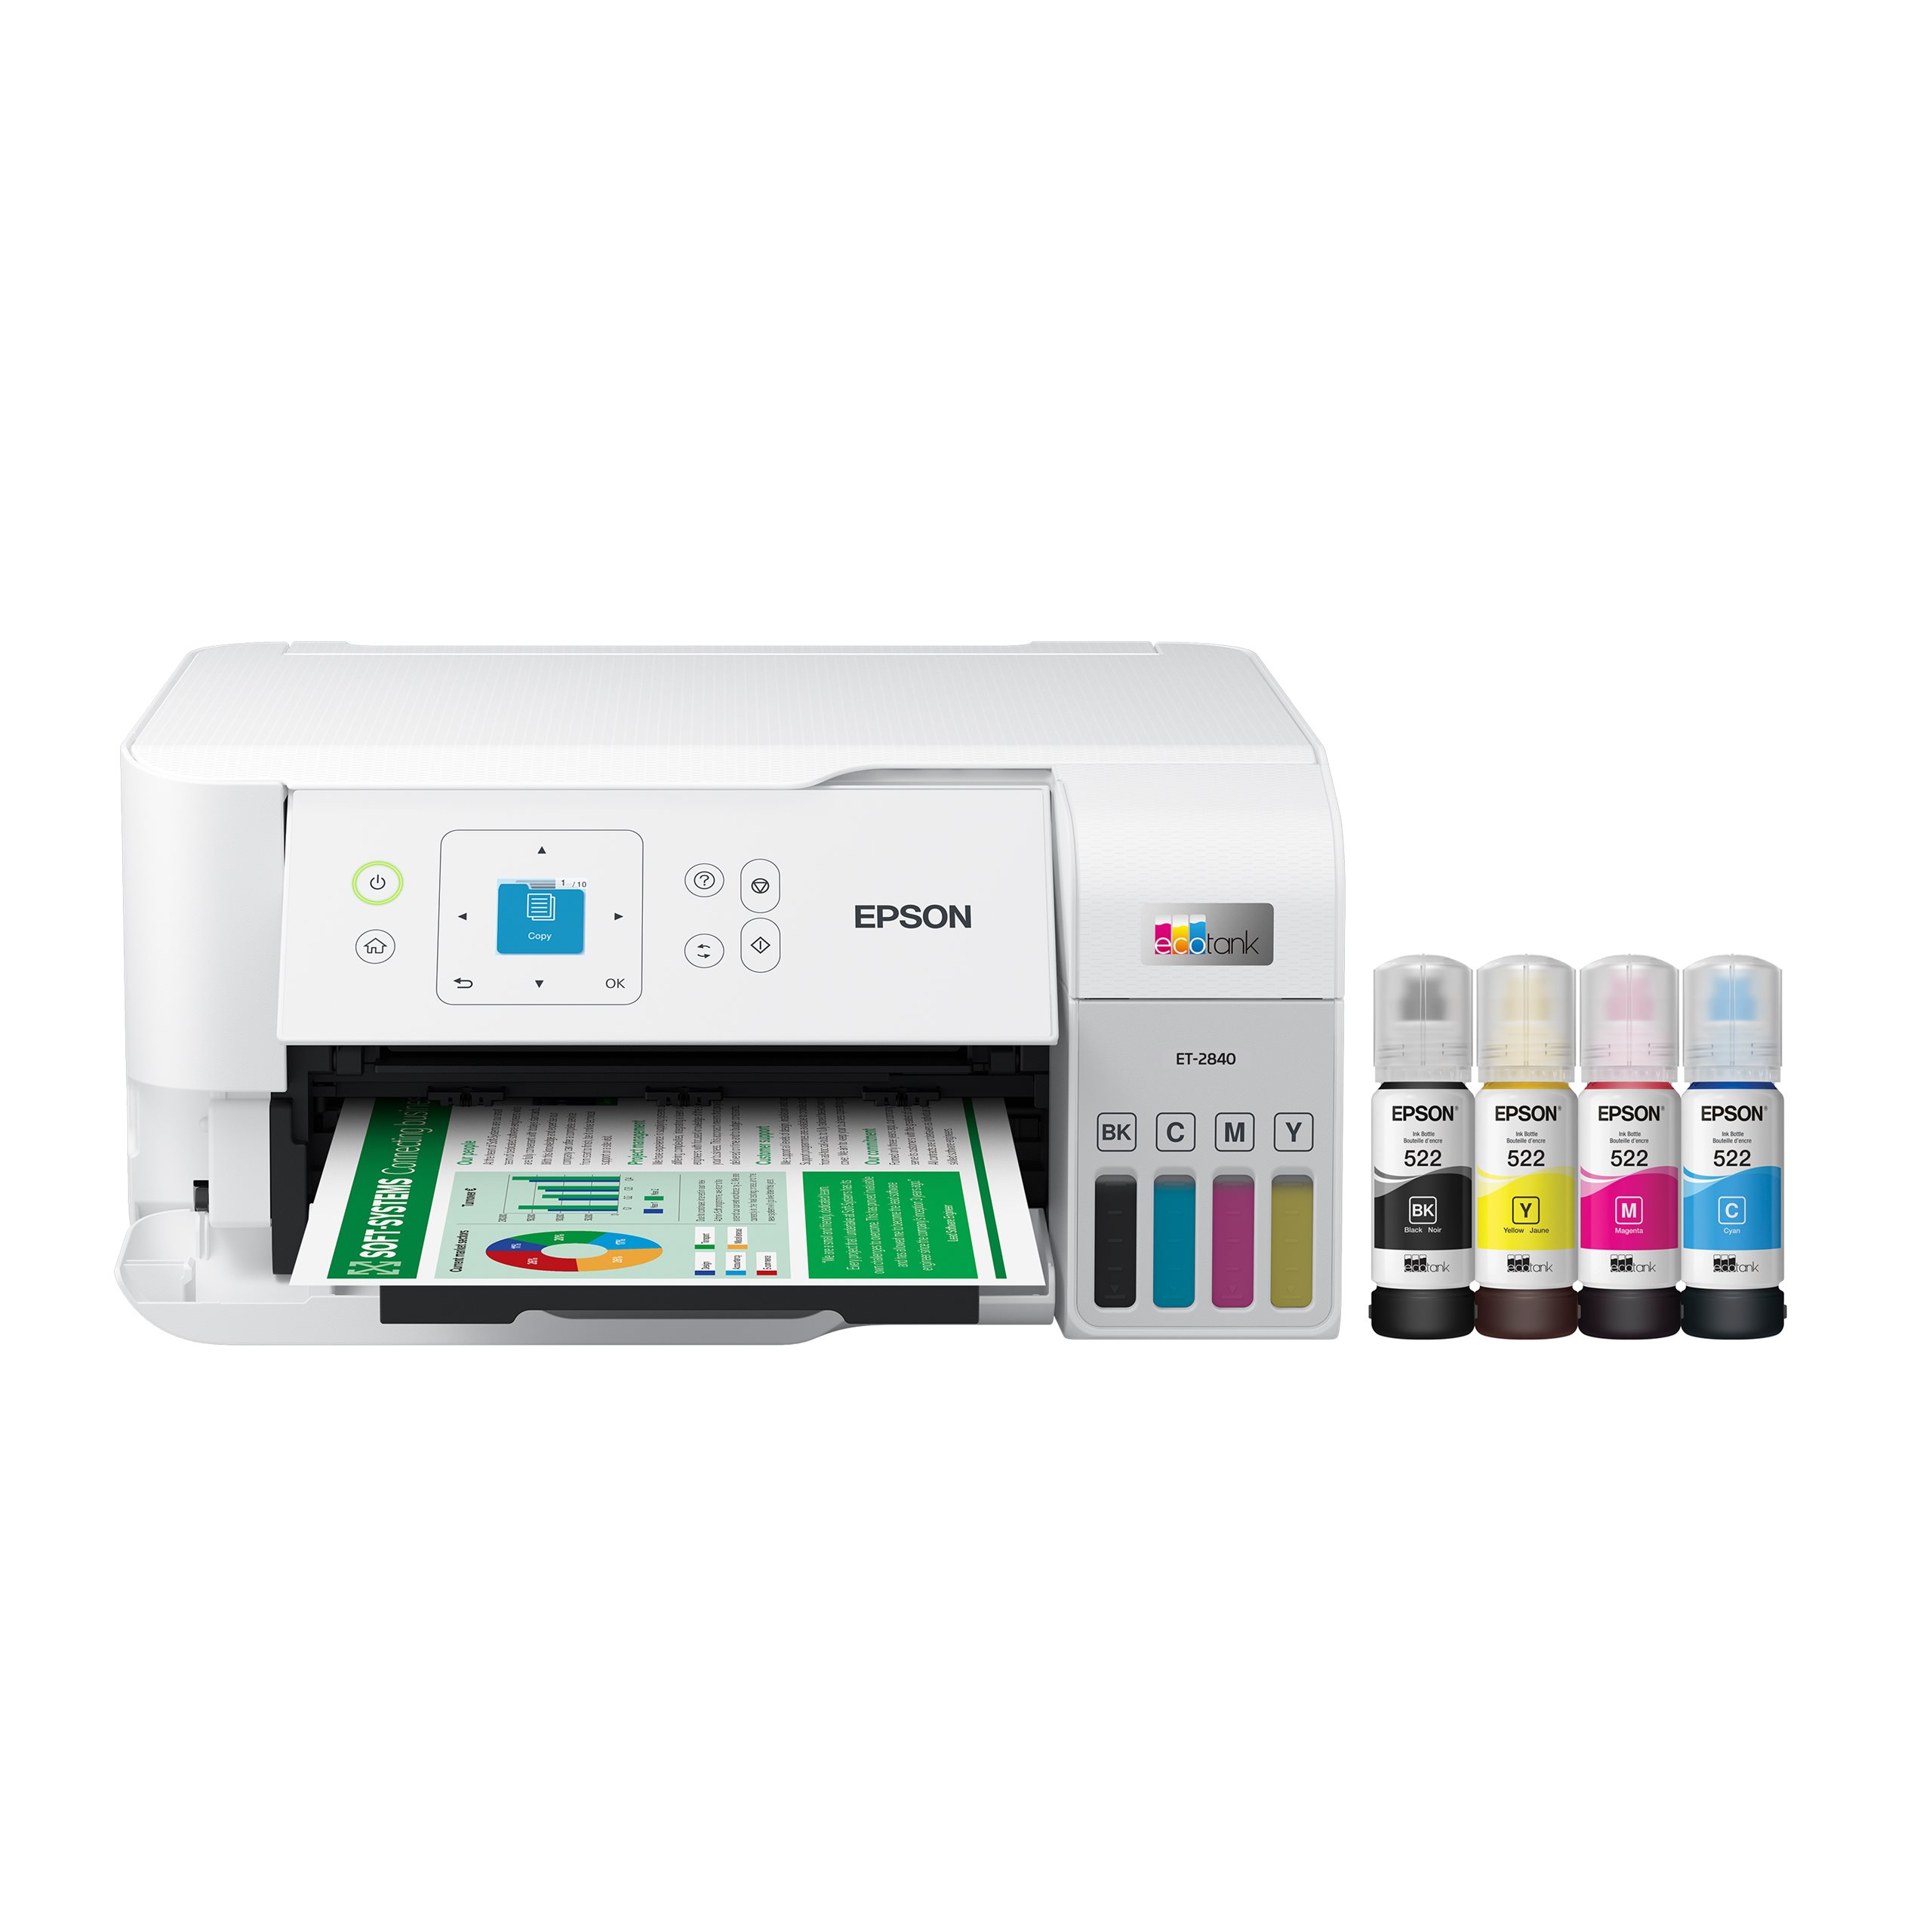  Epson EcoTank ET-2850 Wireless All-in-One Inkjet Color Printer,  4800x1200 dpi, Duplex Printing, Mobile Photo Printing, 1.44 Color LCD  Display, Cartridge-Free, White, Bundle with Printer Cable : Office Products